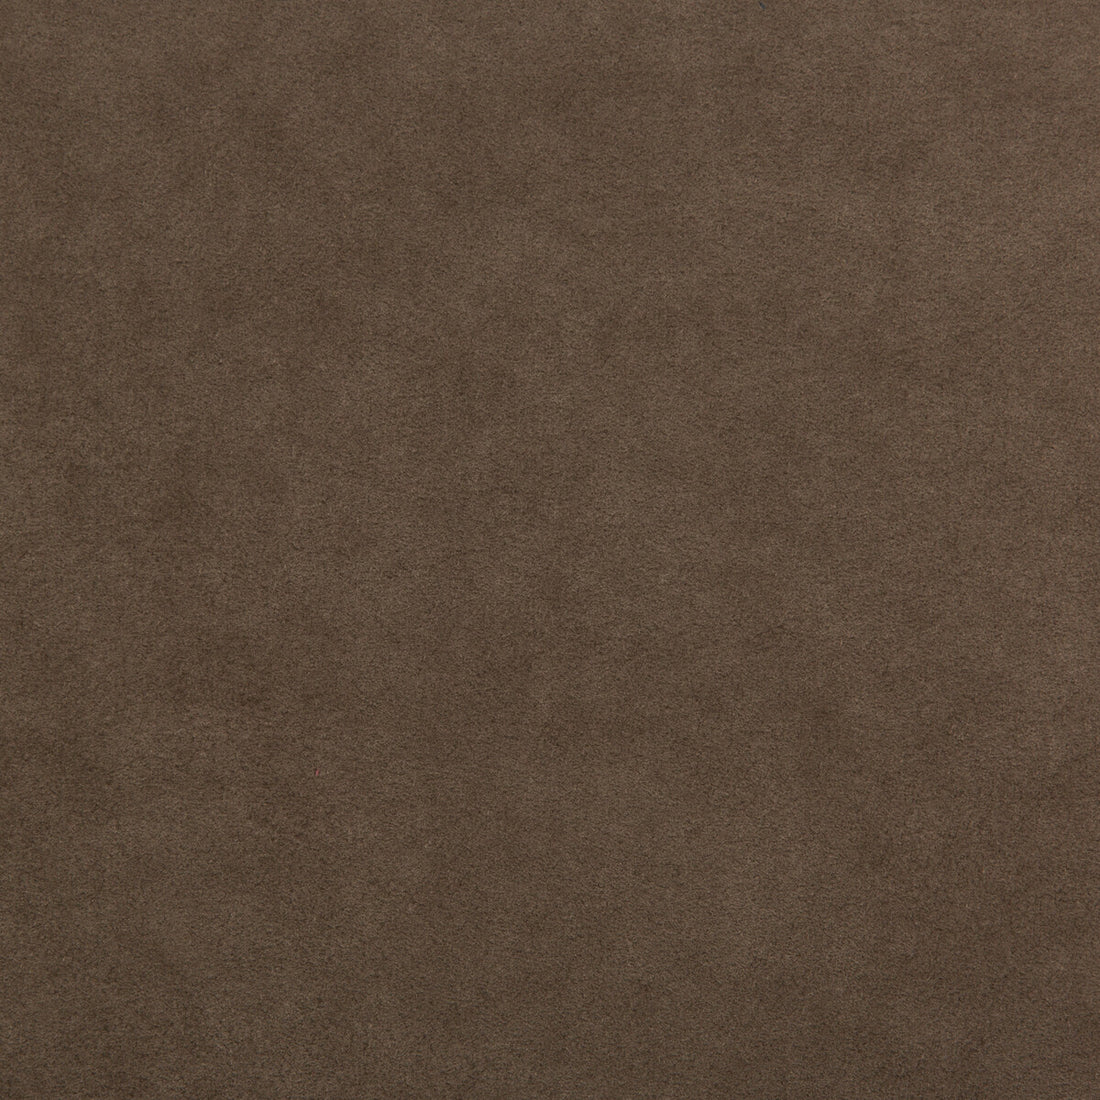 Ultimate fabric in earth color - pattern 960122.661.0 - by Lee Jofa in the Ultimate Suede collection